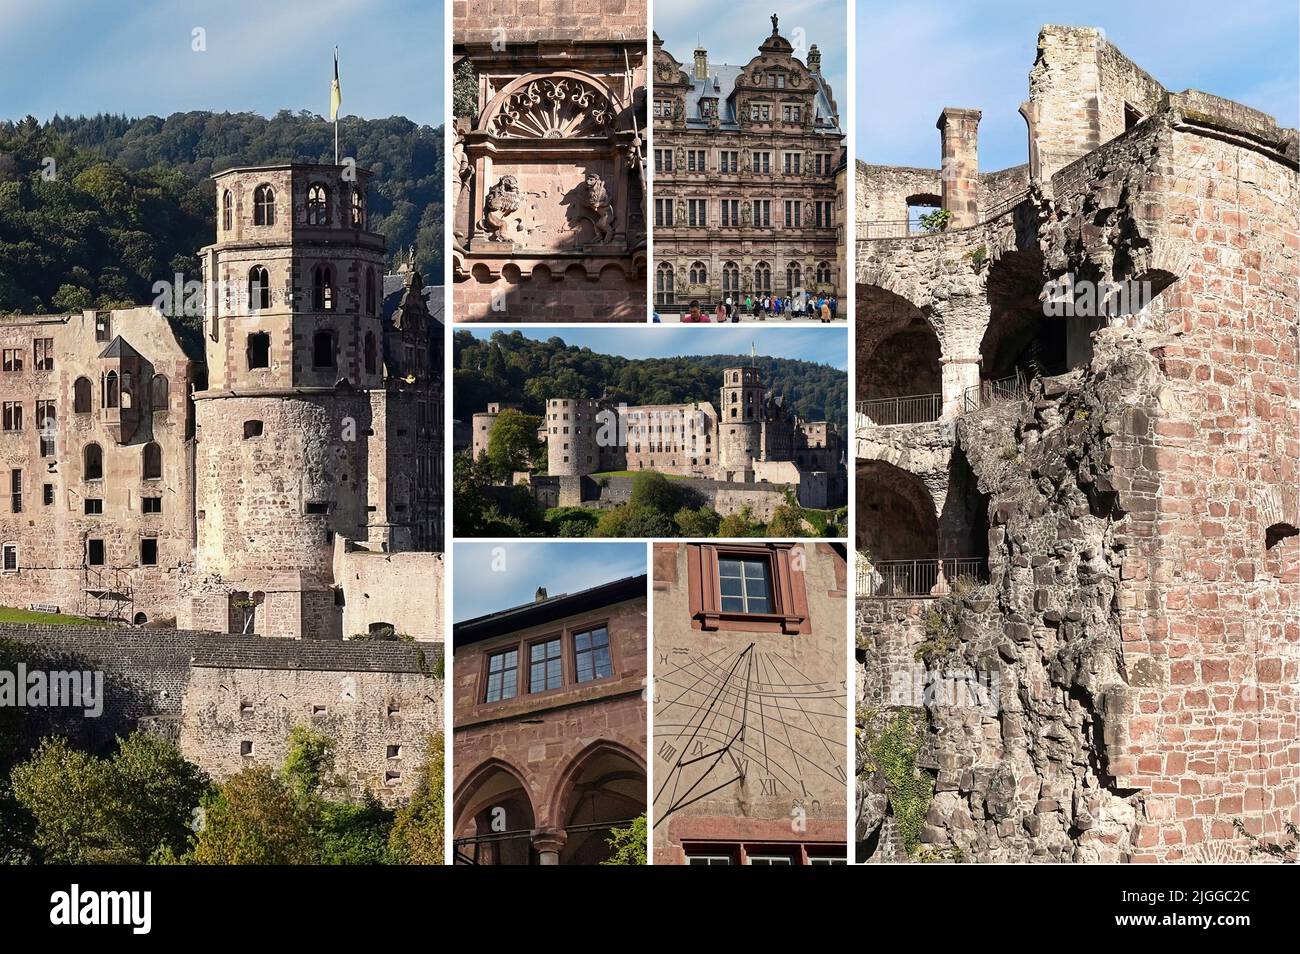 Heidelberg Castle is one of the most famous ruins in Germany and the symbol of the city of Heidelberg. Stock Photo